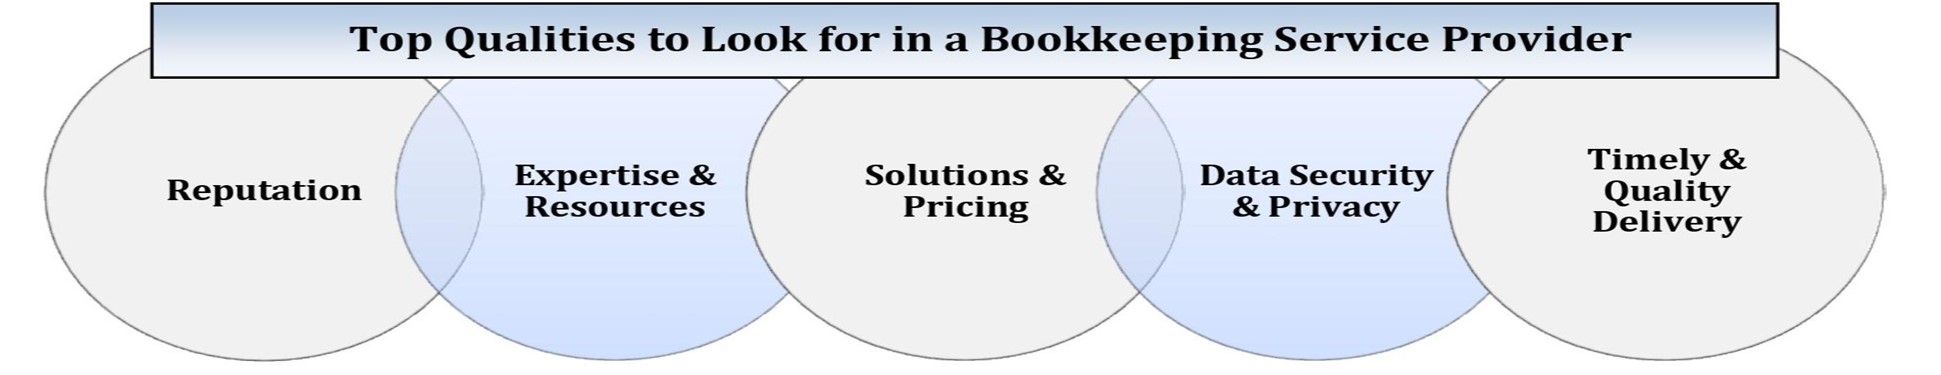 Infographic: Top qualities to seek in a Bookkeeping Service Provider.